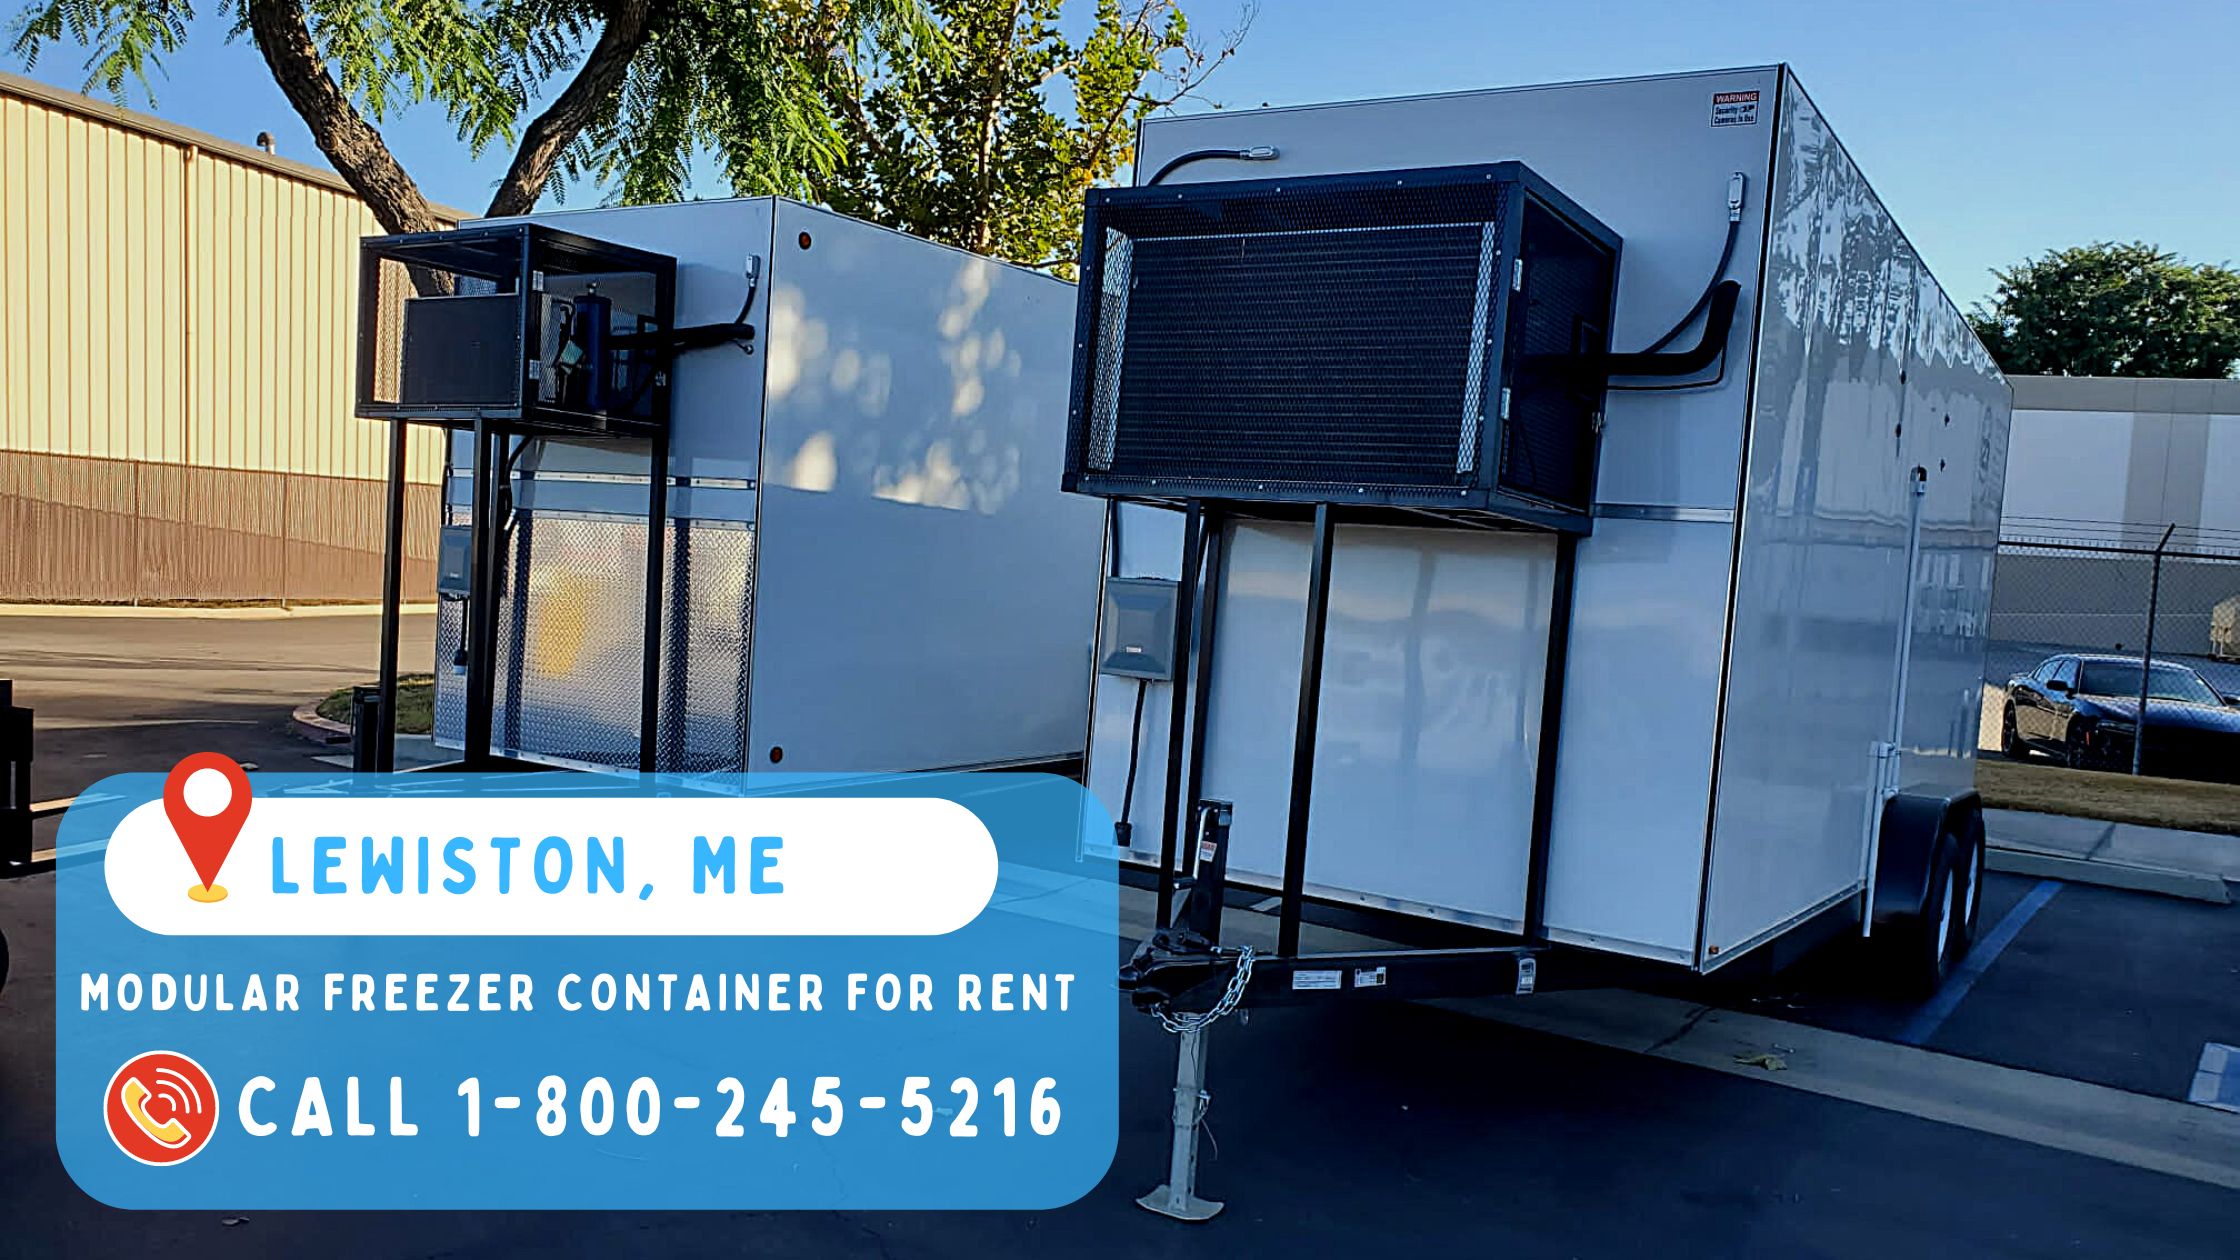 Modular freezer container for rent in Lewiston